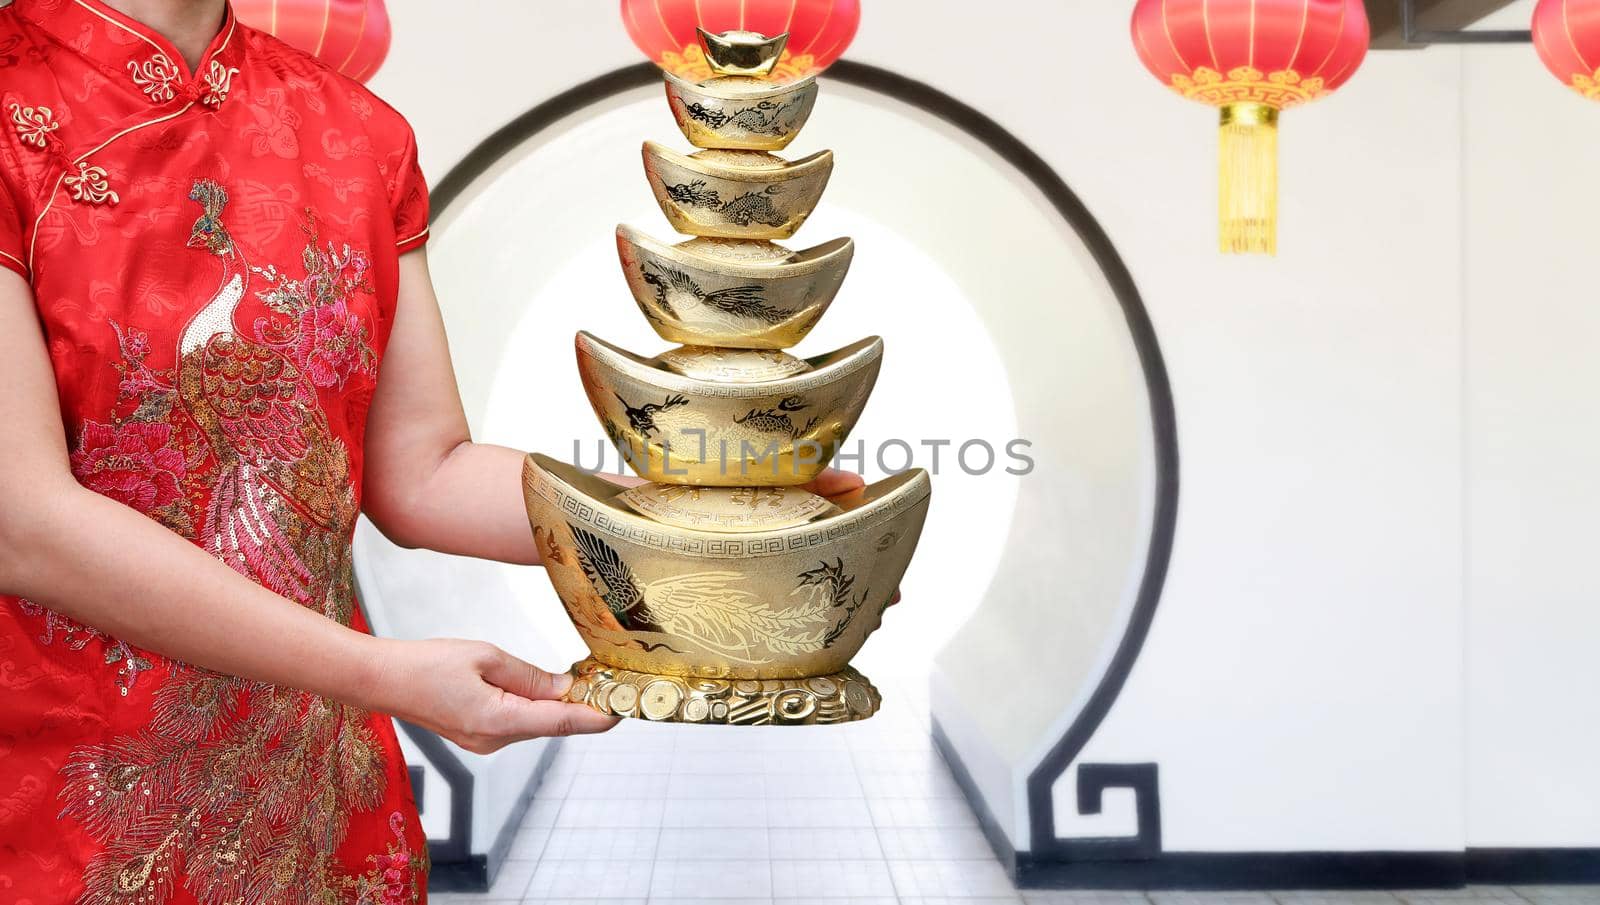 Chinese new year gold ingot (qian) with blessing text mean happy ,healthy and wealth in china town.